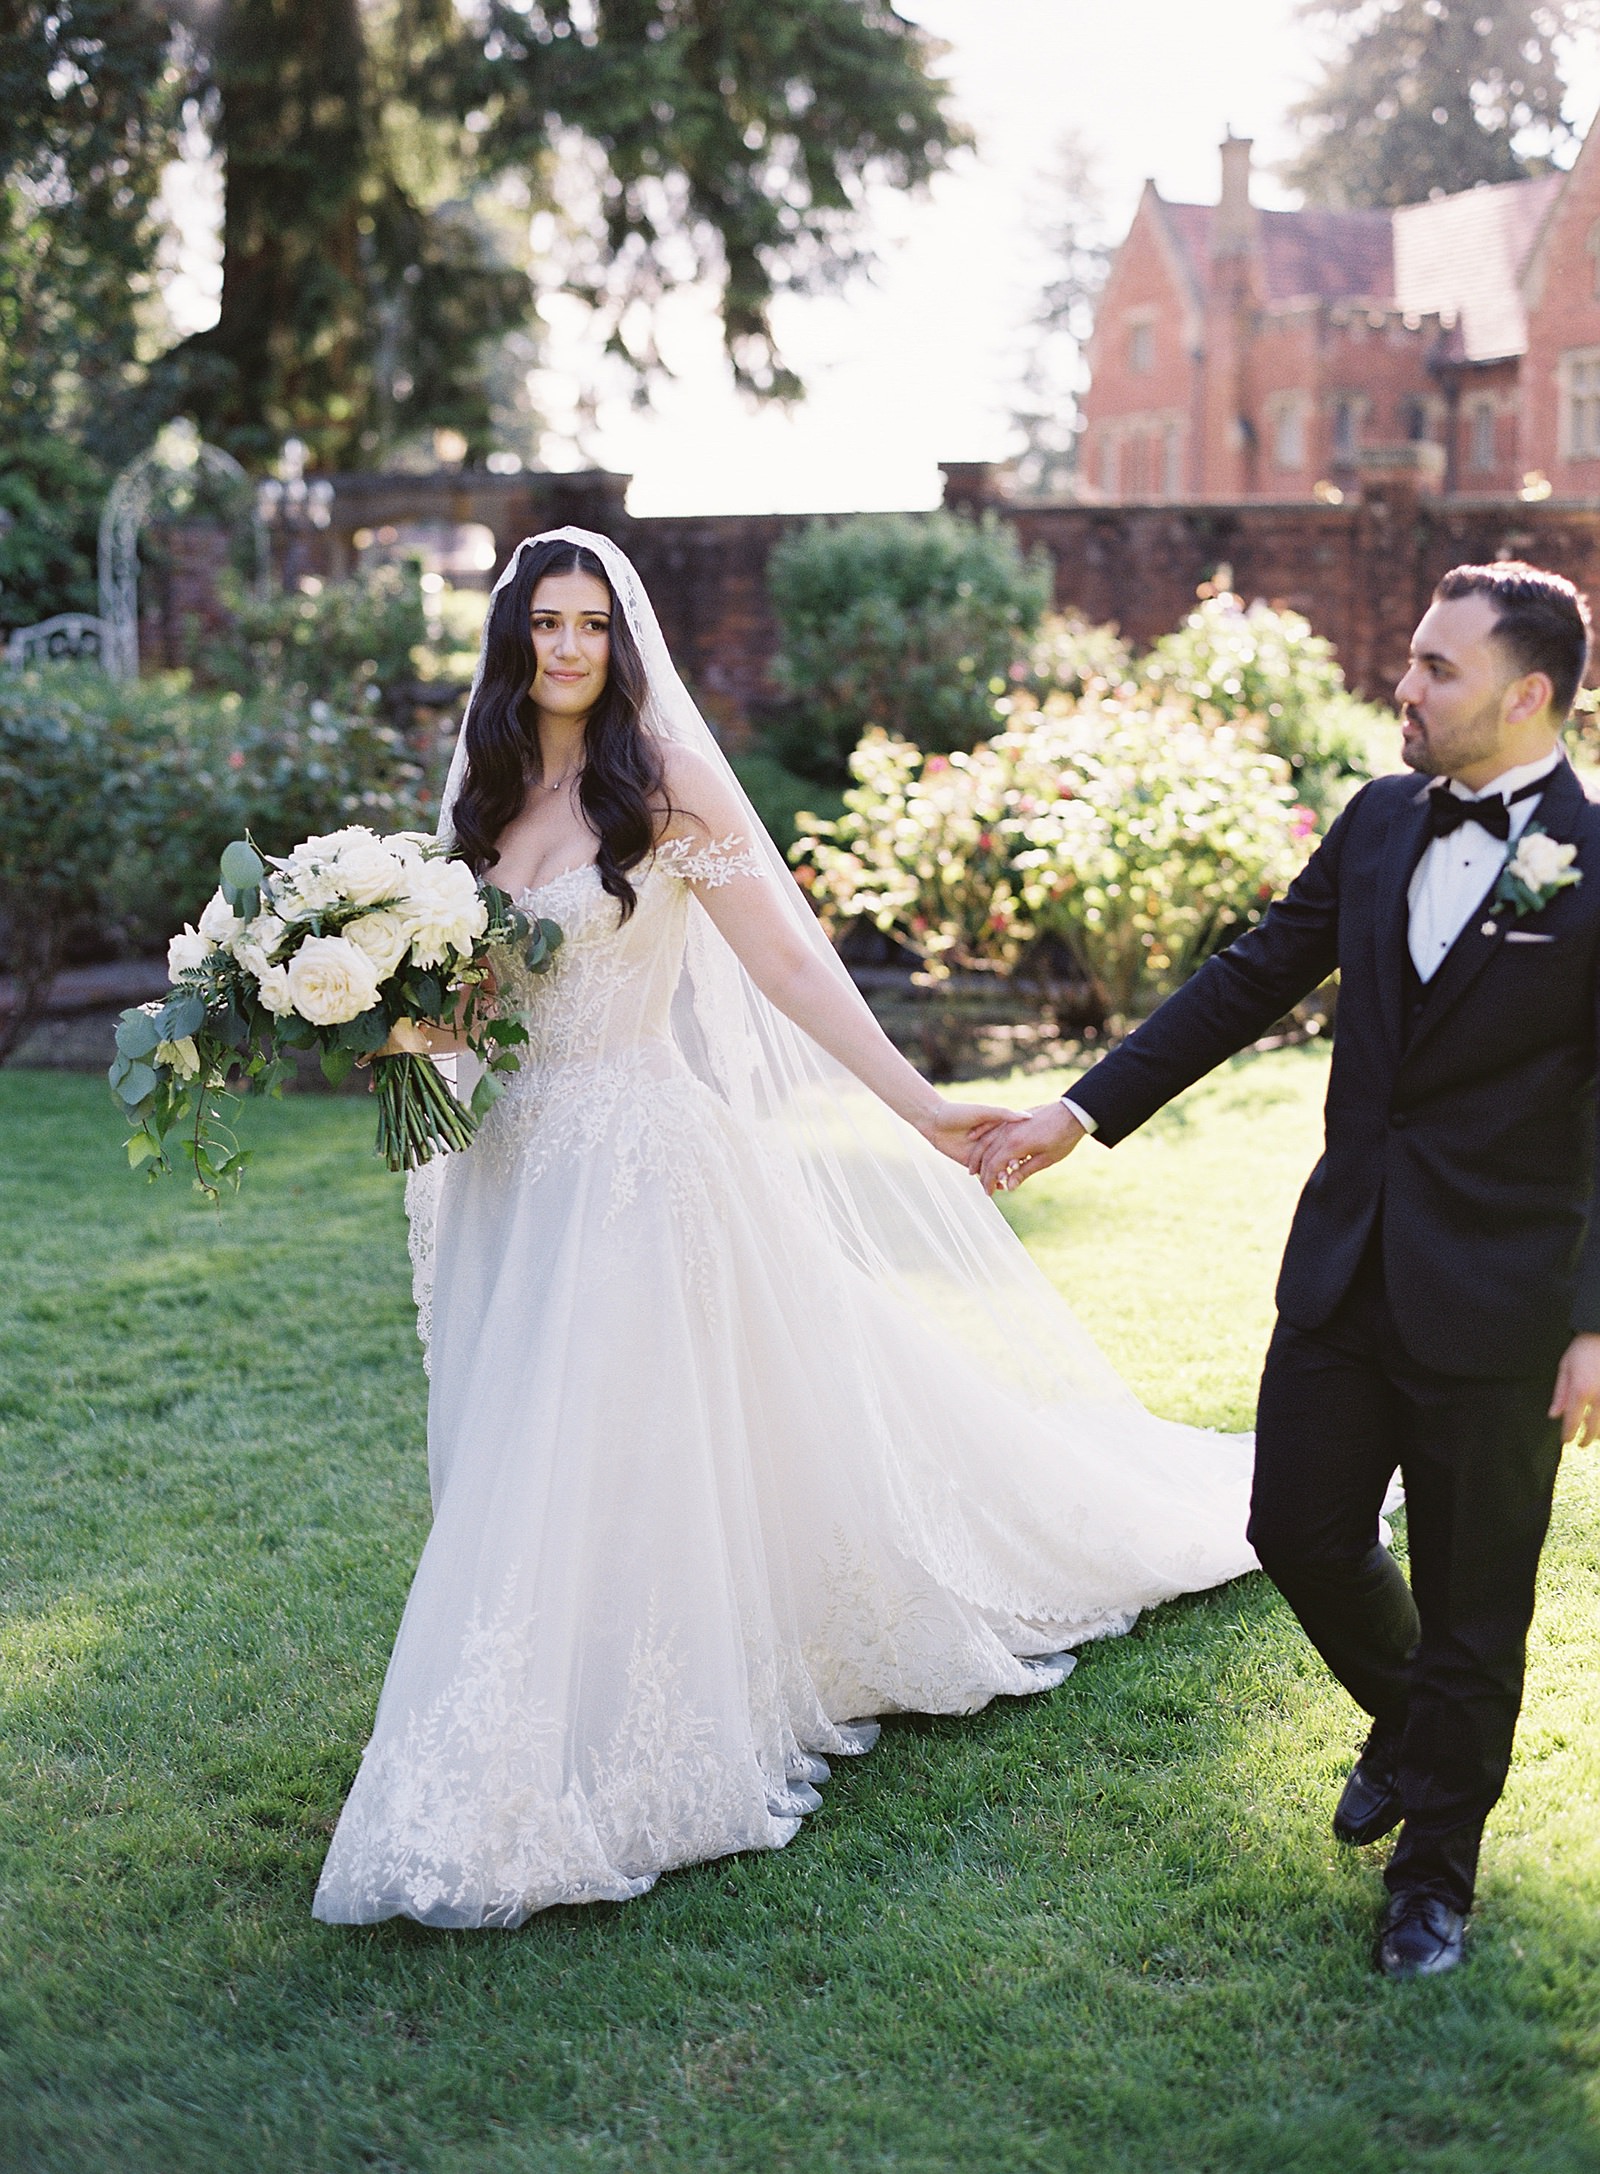 Bride and groom walk in garden in front of Thornewood Castle. Bride wears ines di santo gown and mantilla veil - Jacqueline Benét Photography